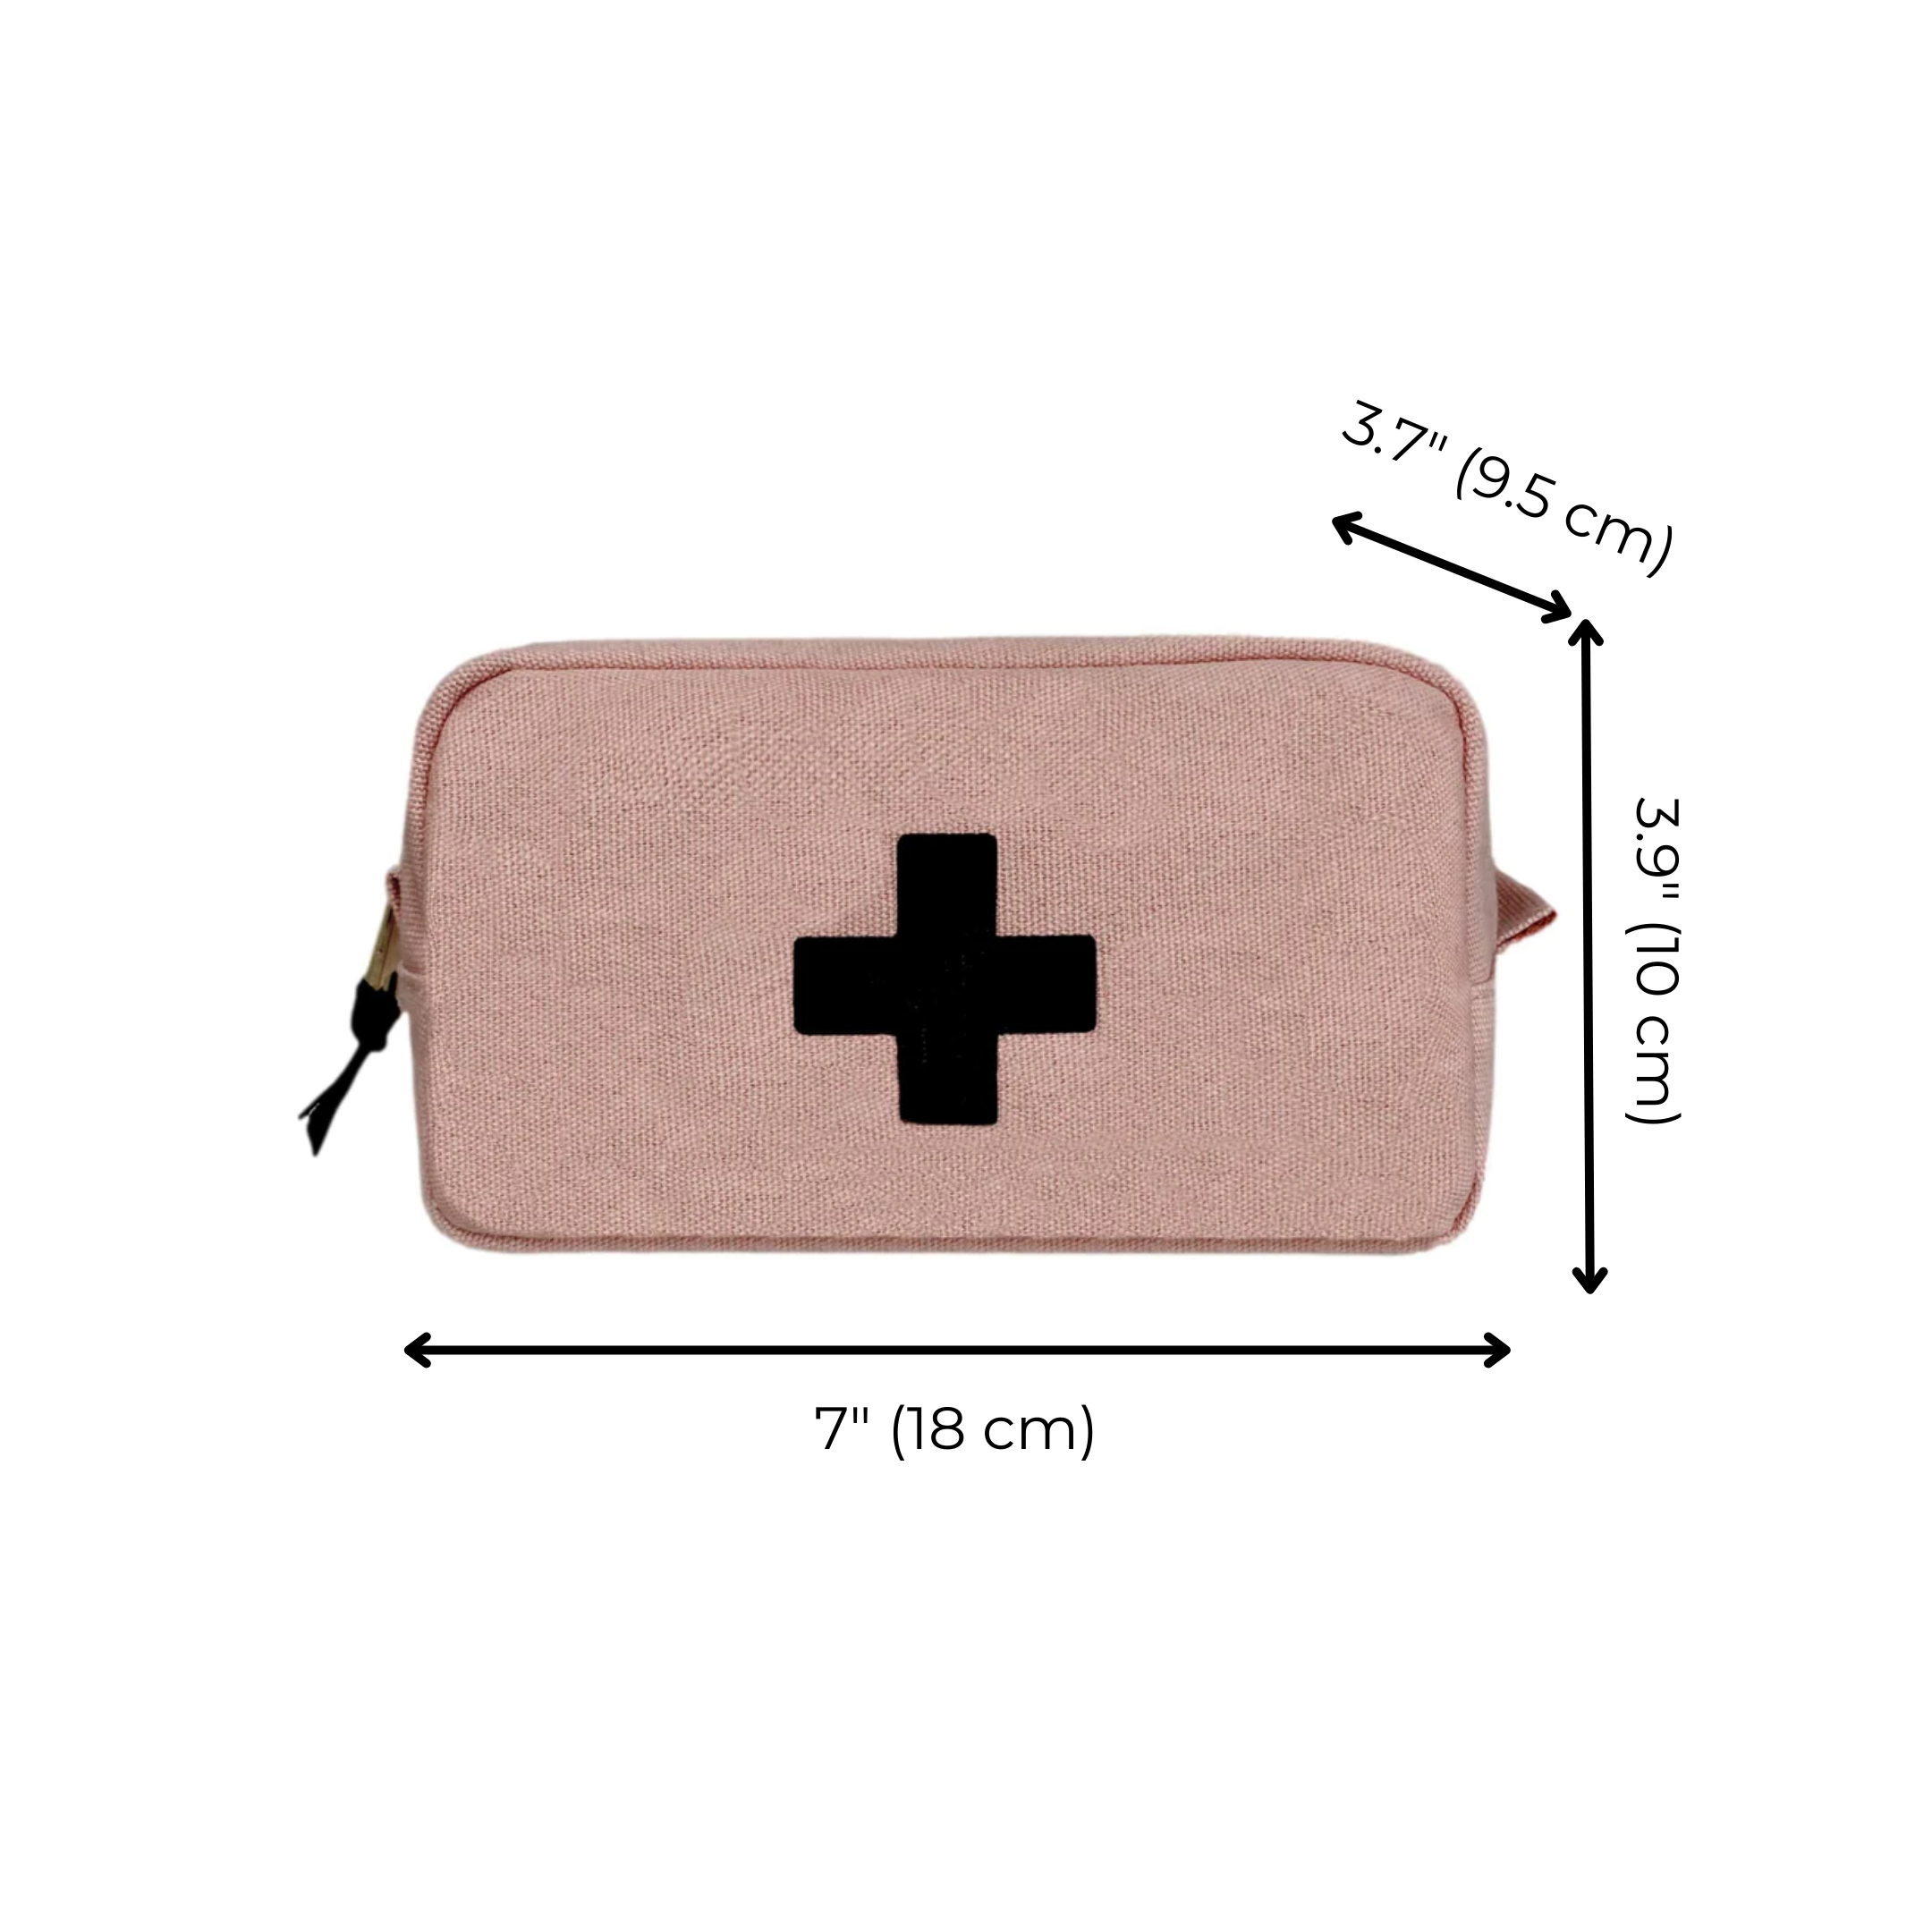 First Aid Organizing Pouch, Pink/Blush | Bag-all